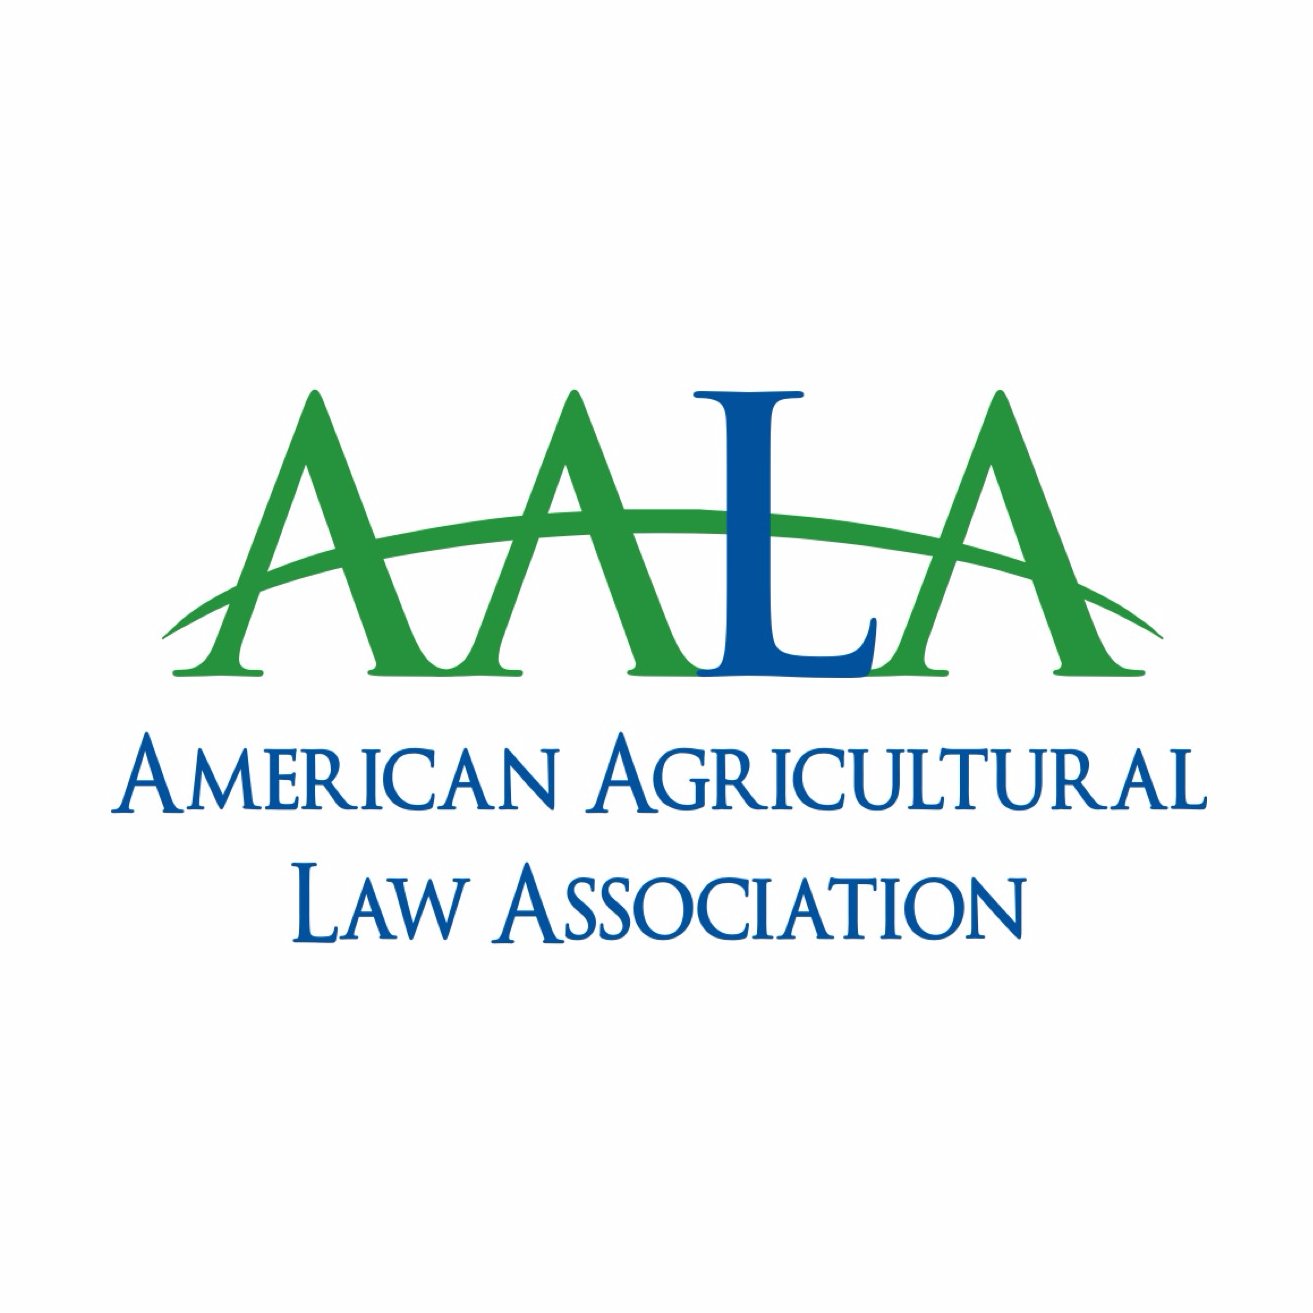 American Agricultural Law Association (AALA) is a national professional organization focusing on the legal needs of the agricultural community.